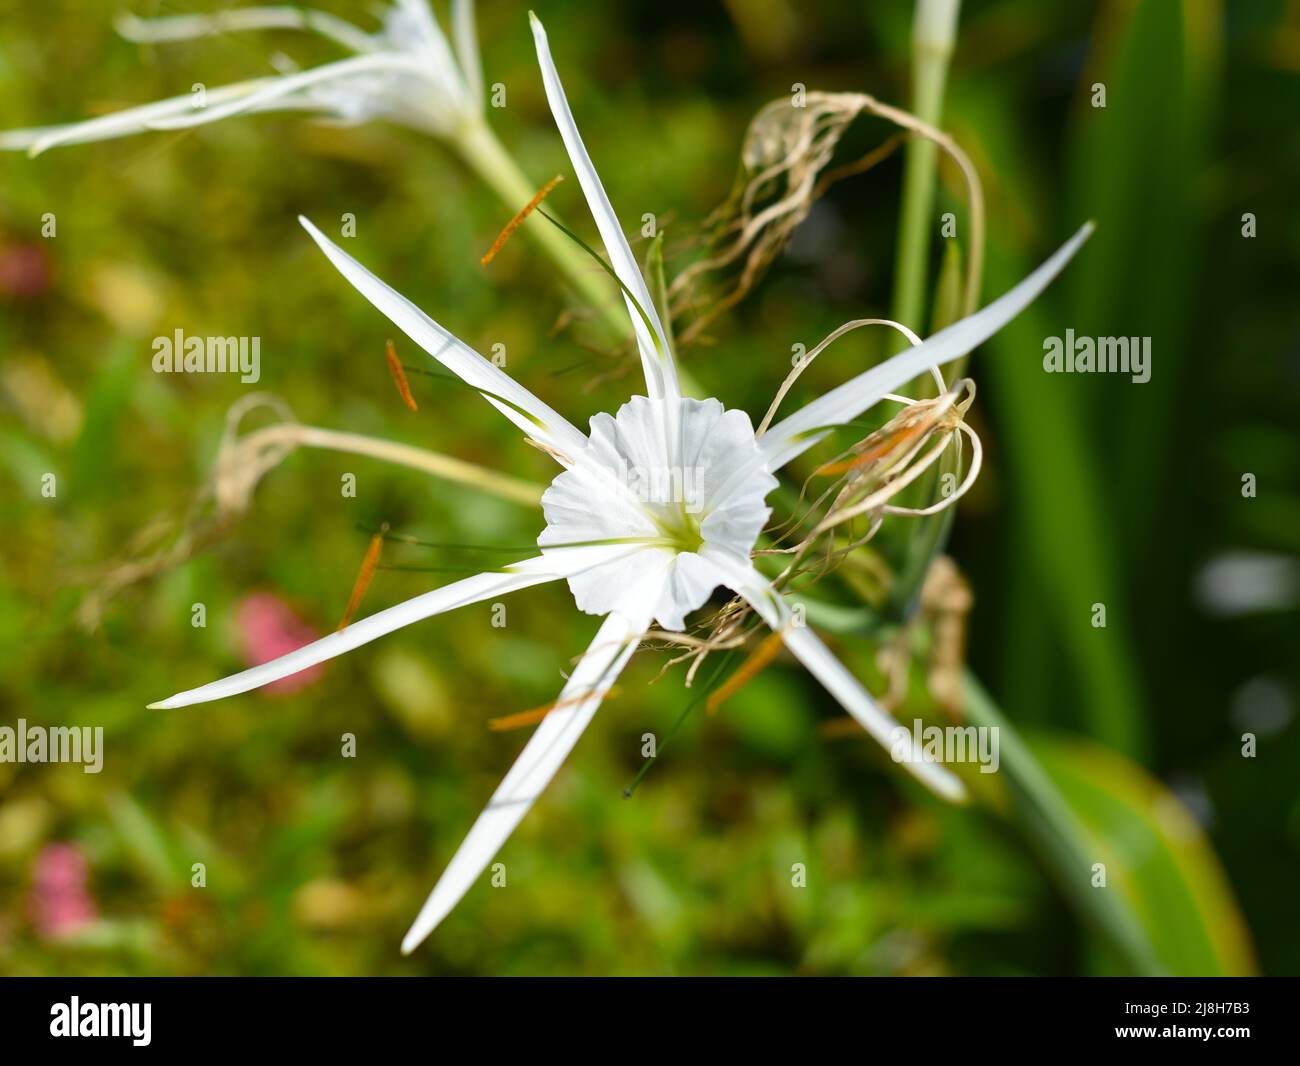 Hymenocallis littoralis or the beach spider lily growing in Vietnam Stock Photo